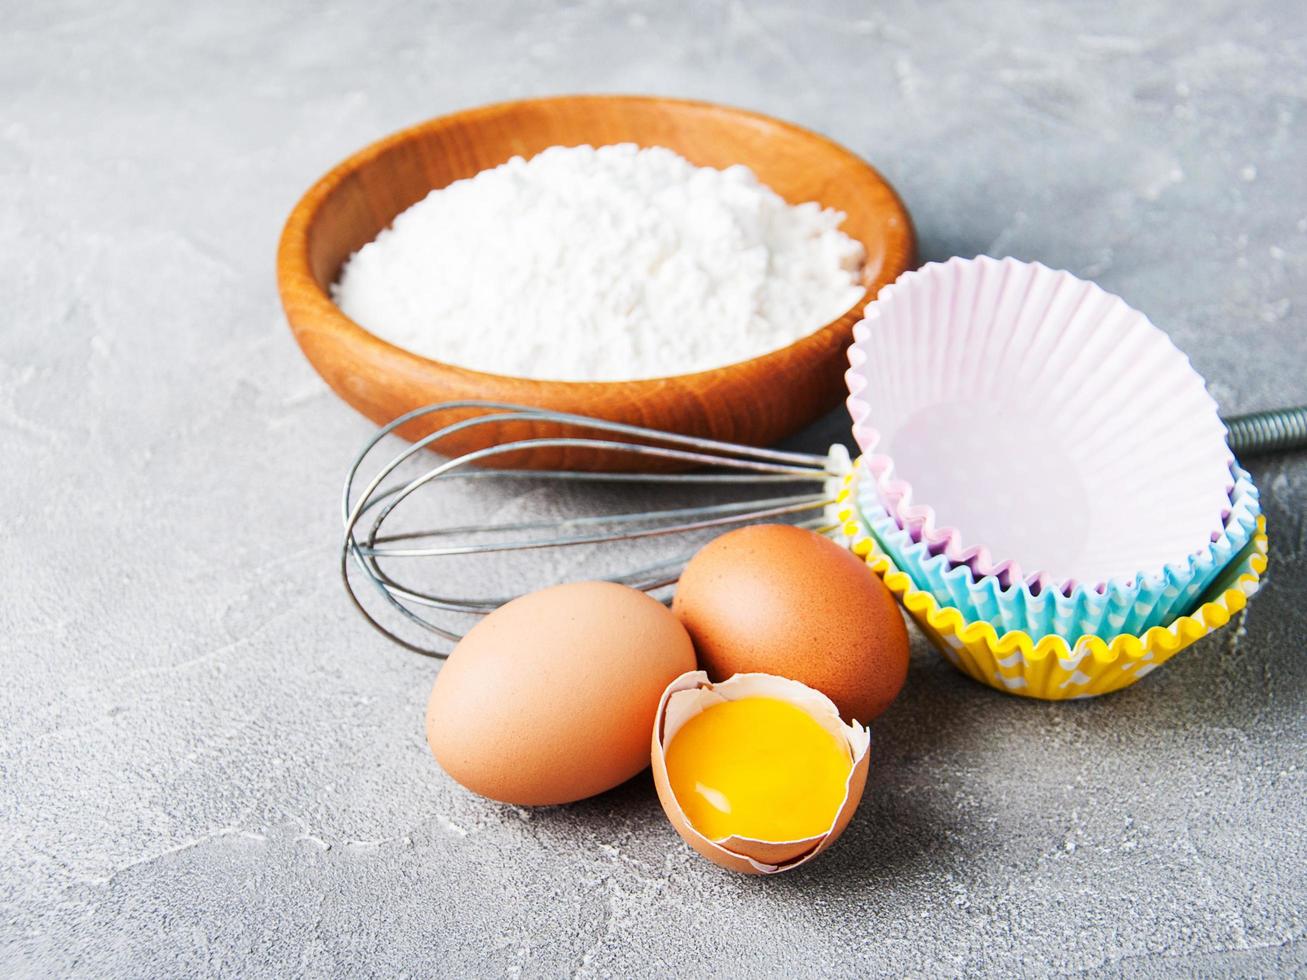 Baking ingredients - flour and eggs photo